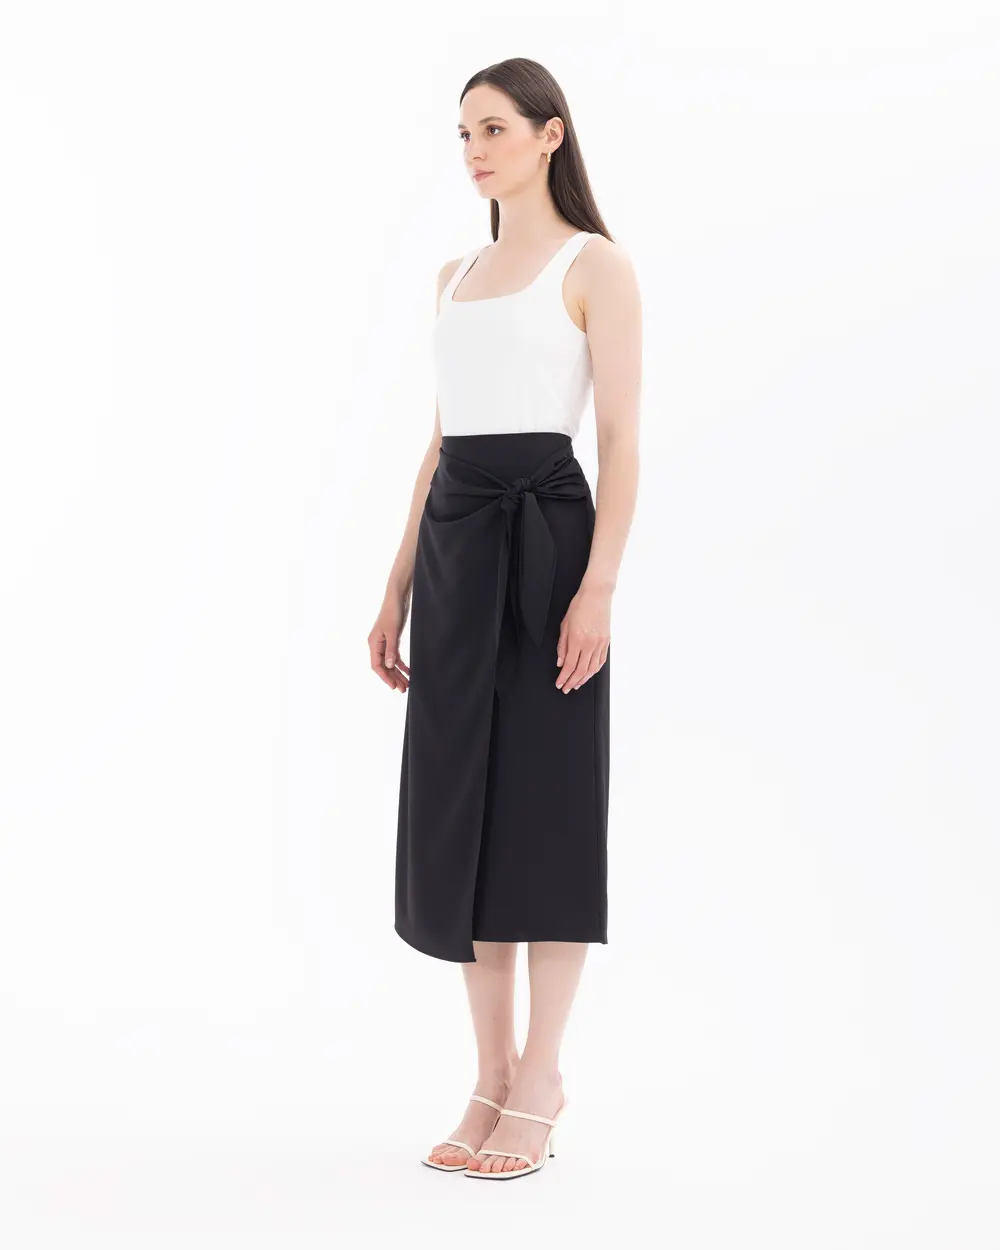 Belted Double-breasted Narrow Form Skirt